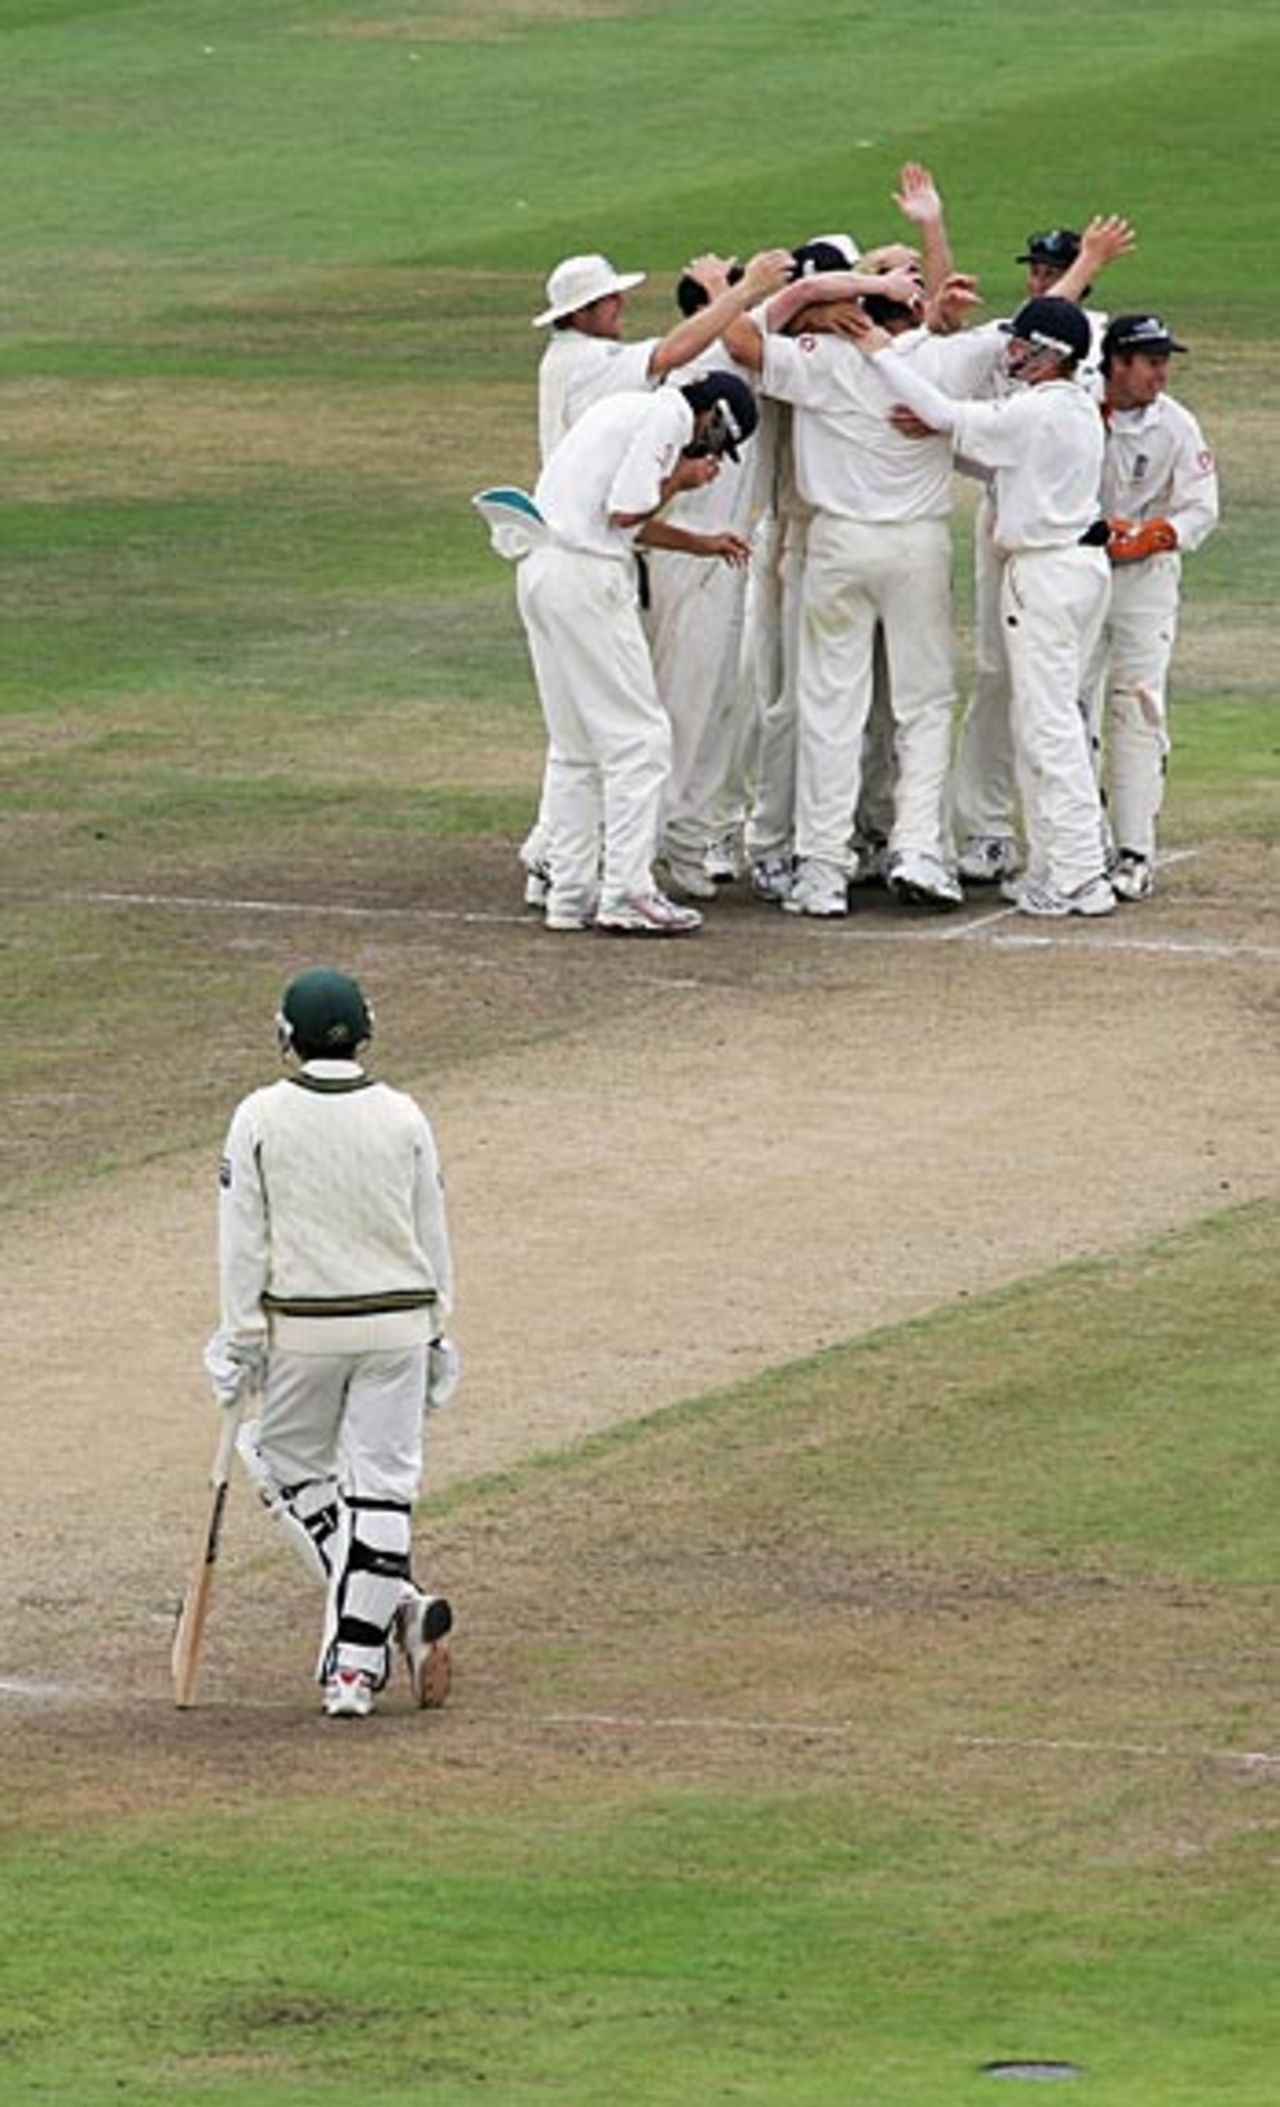 England celebrate another wicket as Pakistan struggle at Old Trafford, England v Pakistan, 2nd Test, Old Trafford, July 29, 2006